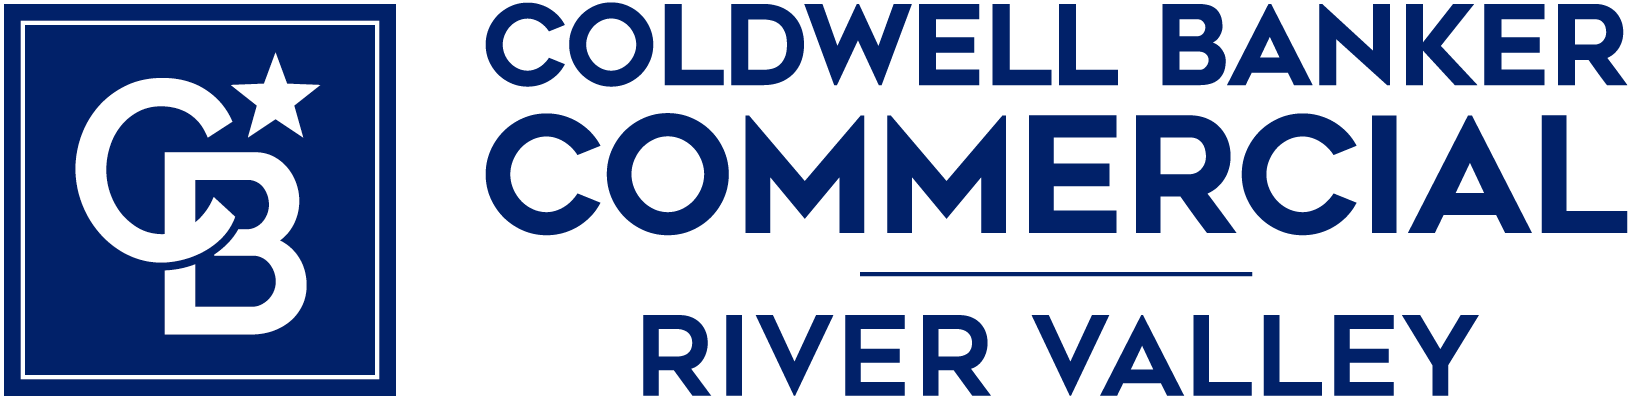 Chuck Olson - Coldwell Banker Commercial River Valley Logo